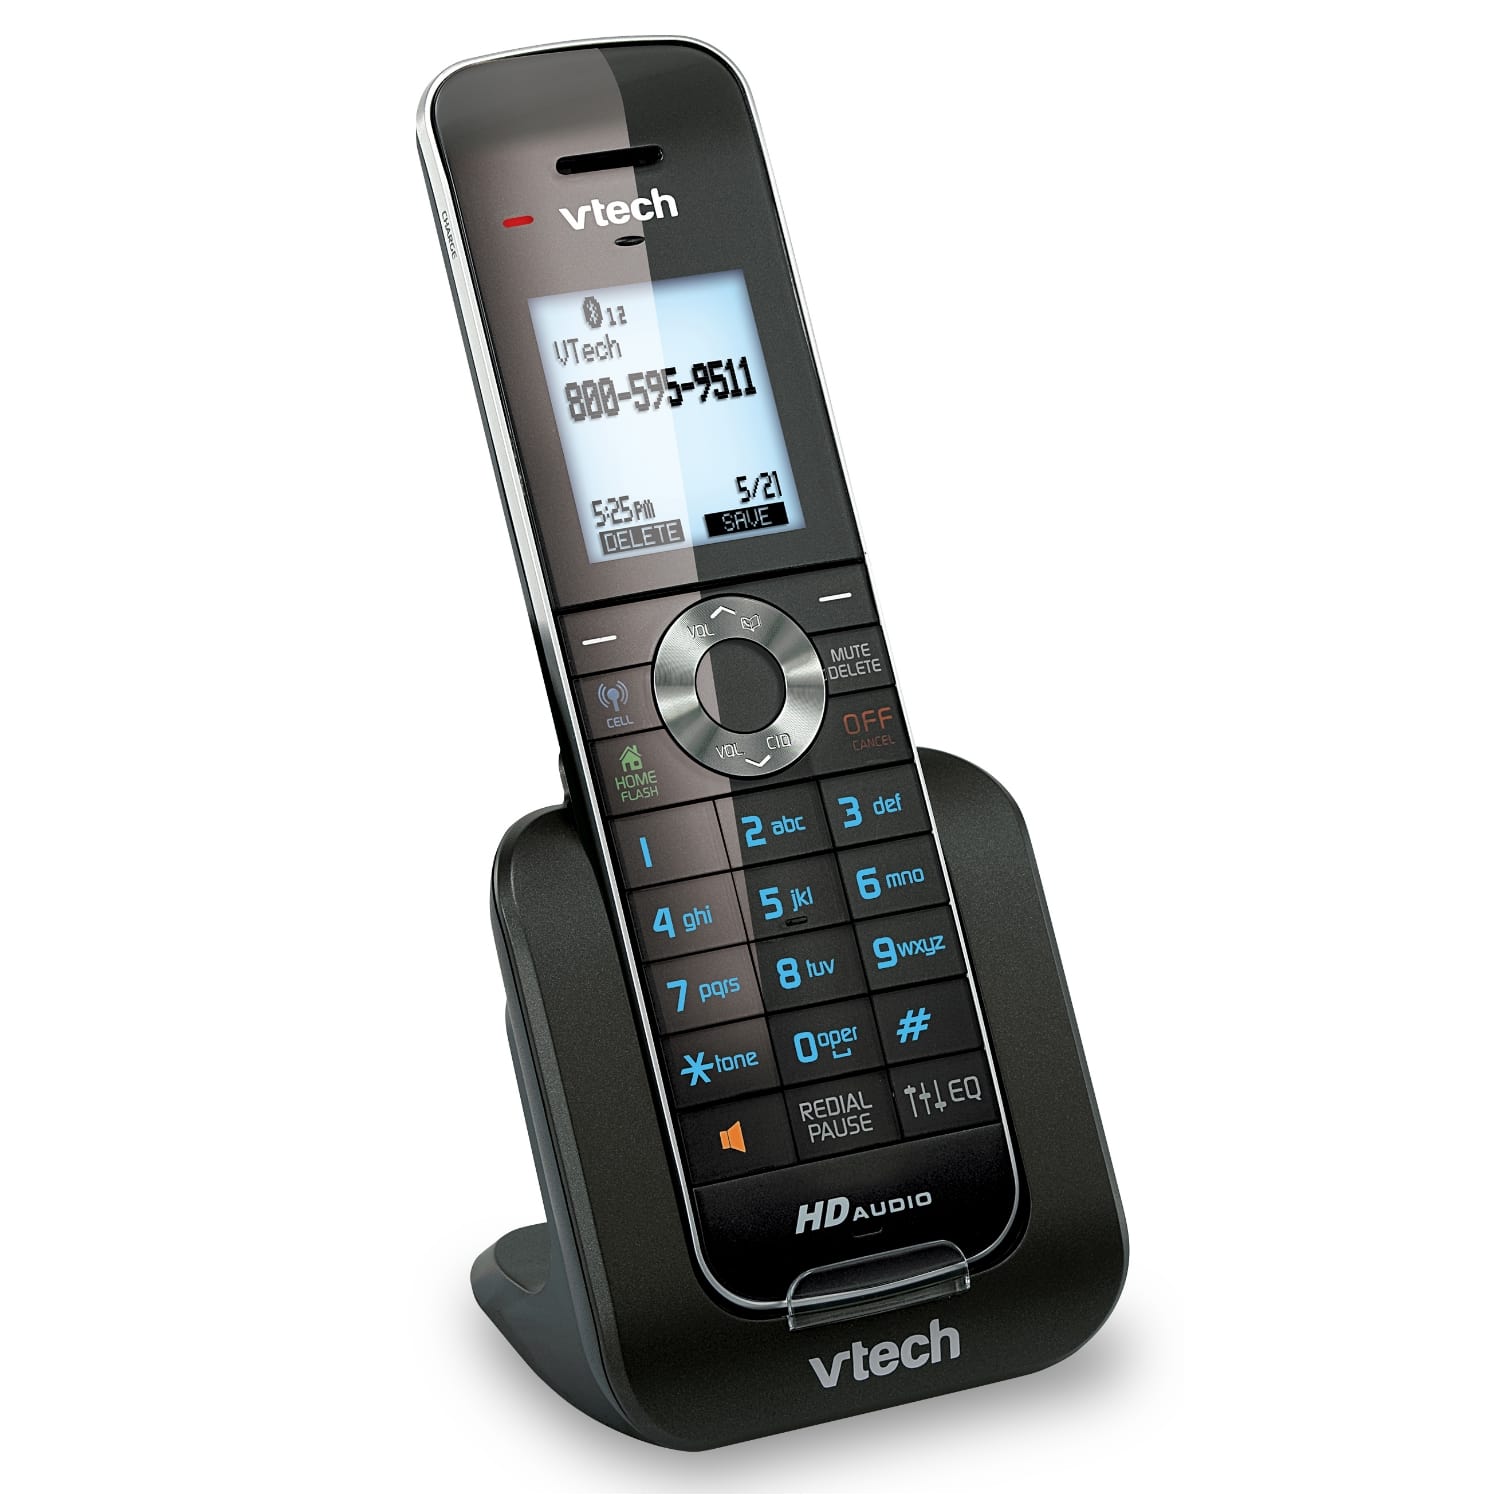 6 Handset Connect to Cell™ Phone System with Cordless Headset - view 7